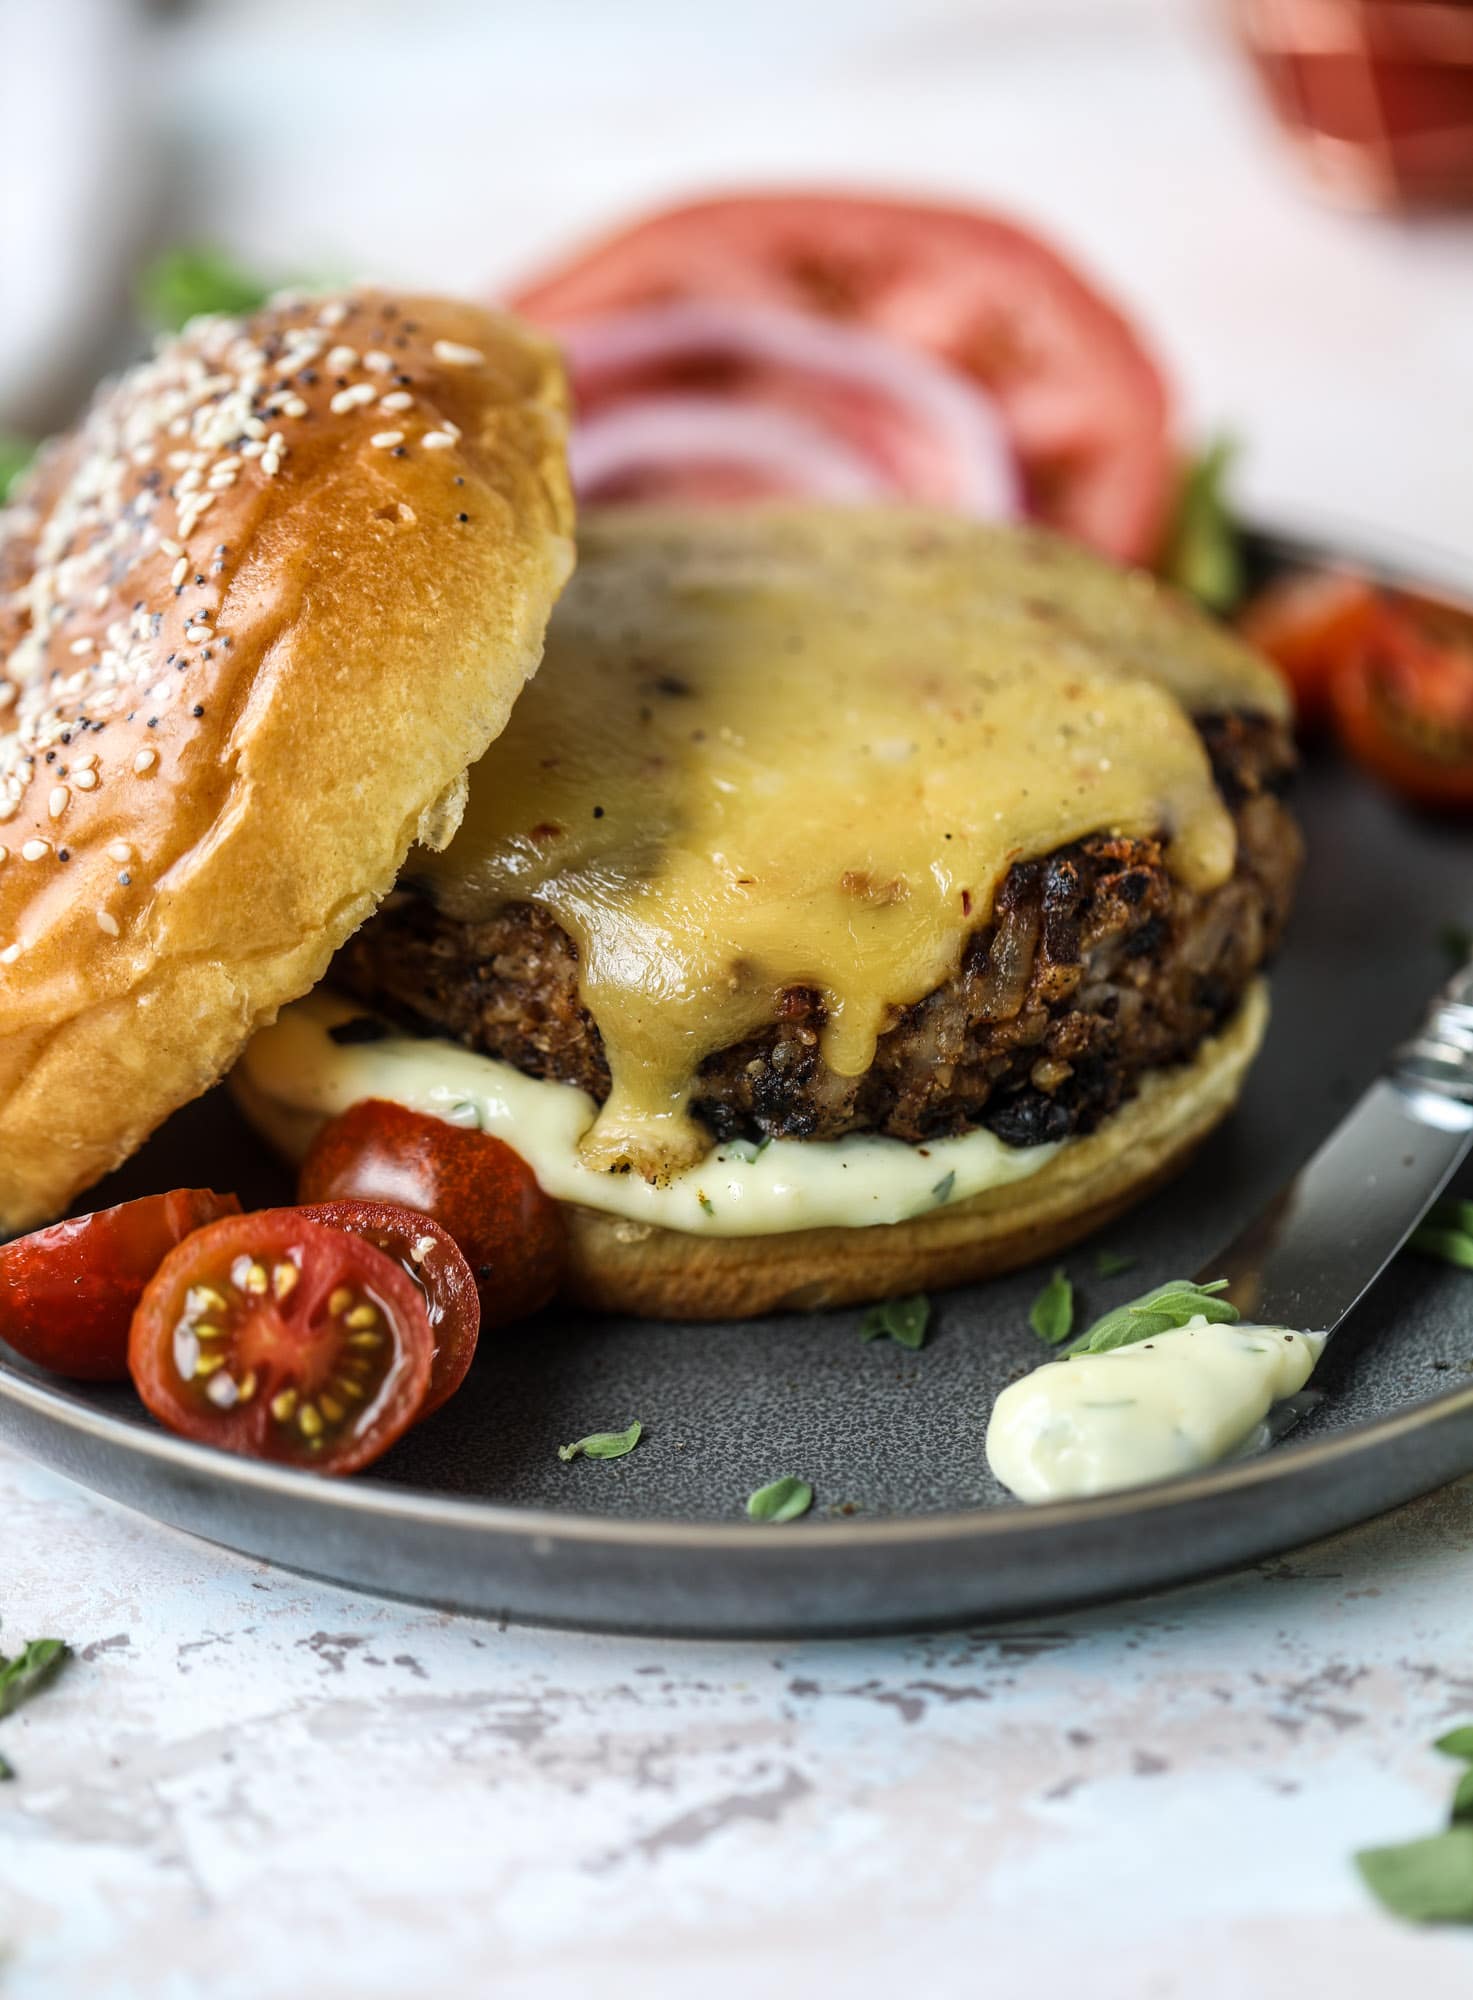 This is the best ever veggie burger and that is not an exaggeration! It's delicious, full of texture and chew, super satisfying and actually sticks together in the pan. You can serve it on buns, make a patty melt, a salad or lettuce wraps - perfection! I howsweeteats.com #best #veggie #burger #vegetarian #beans #quinoa